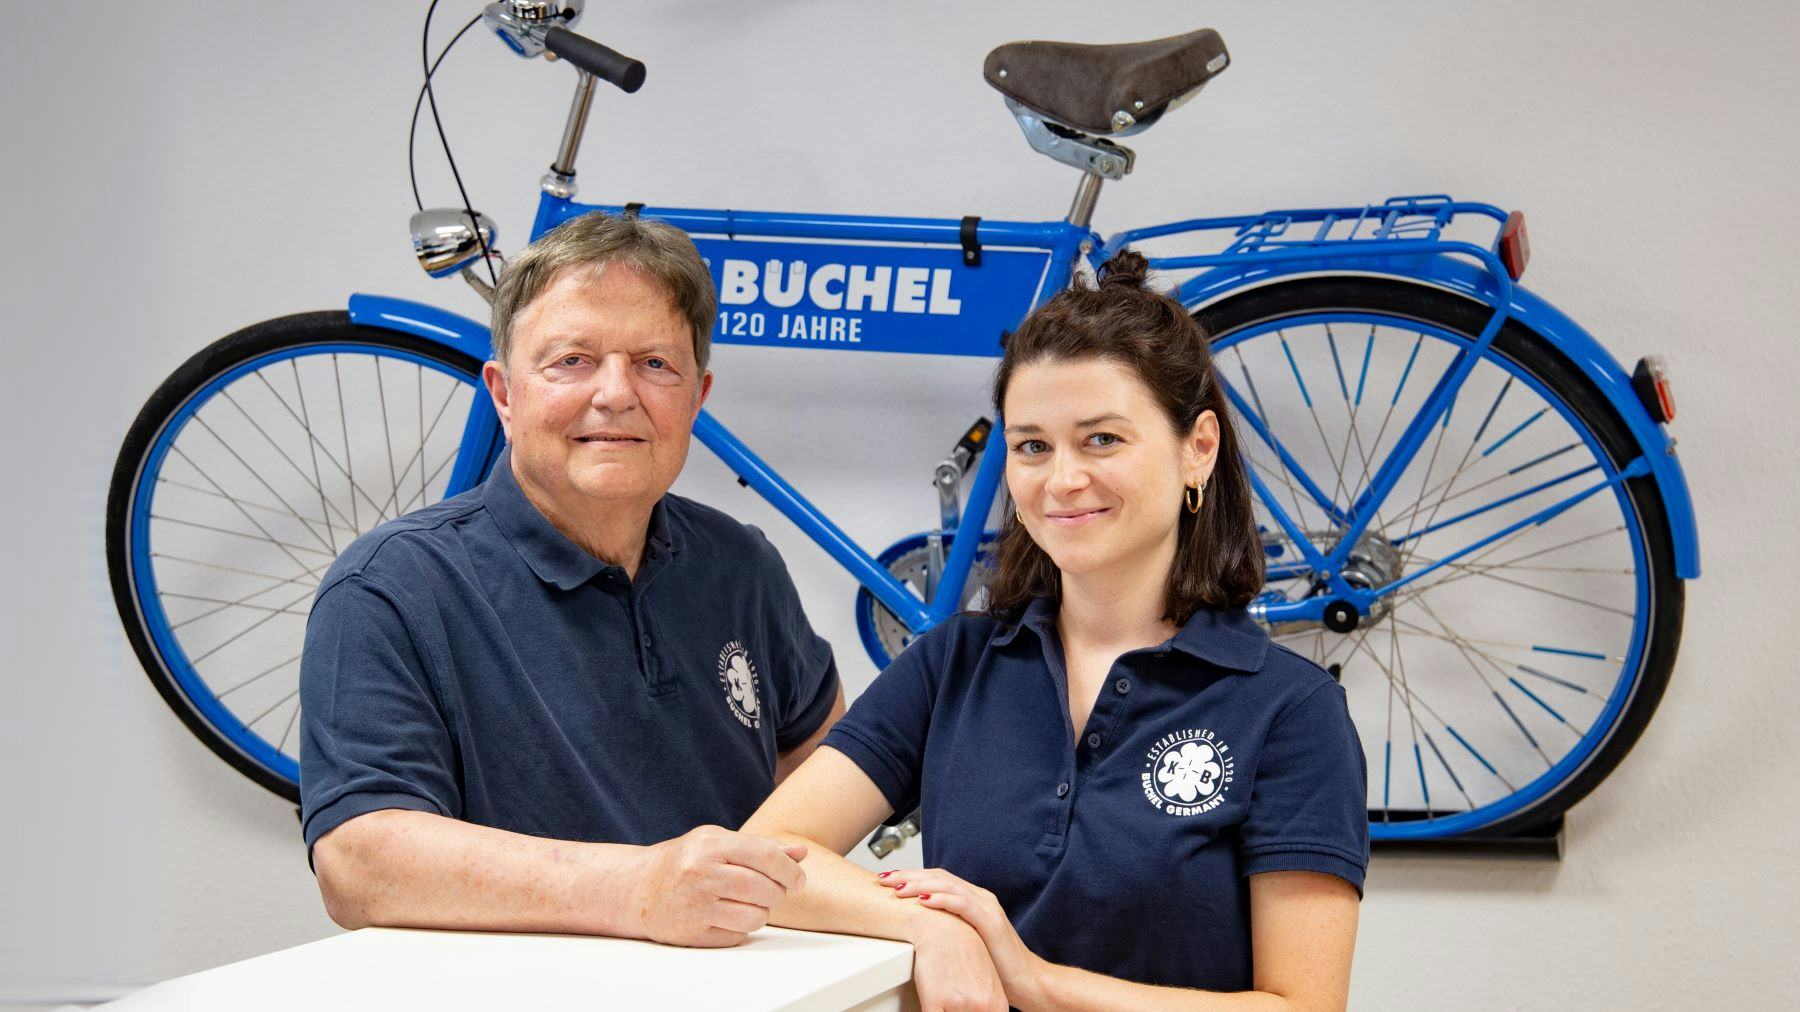 “The possibility of stepping into my father's shoes is on the horizon, but it's important to understand that our approach is quite flexible,” explains Daria Büchel as she takes her first steps into the family business. – Photo Büchel